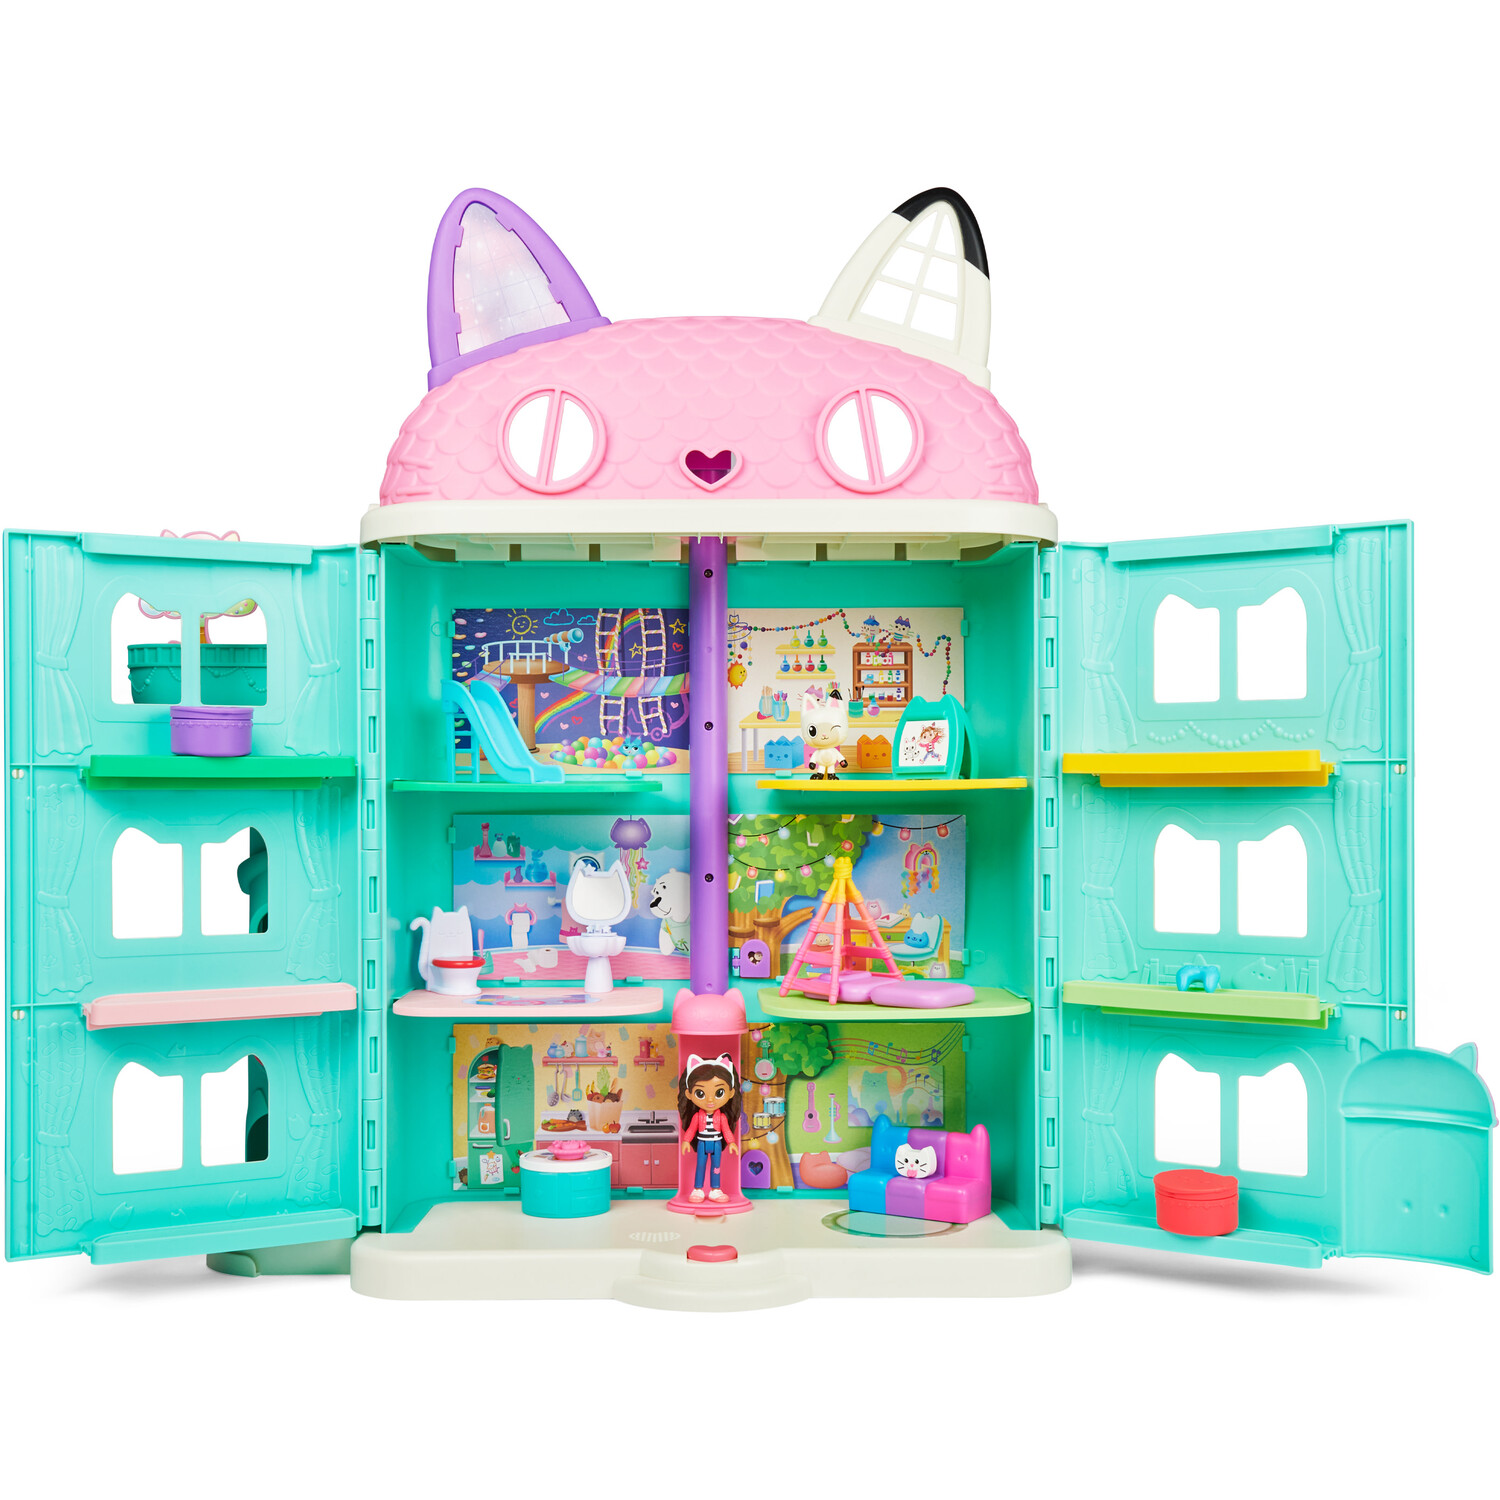 Gabby's Purrfect Dollhouse Playset Image 2